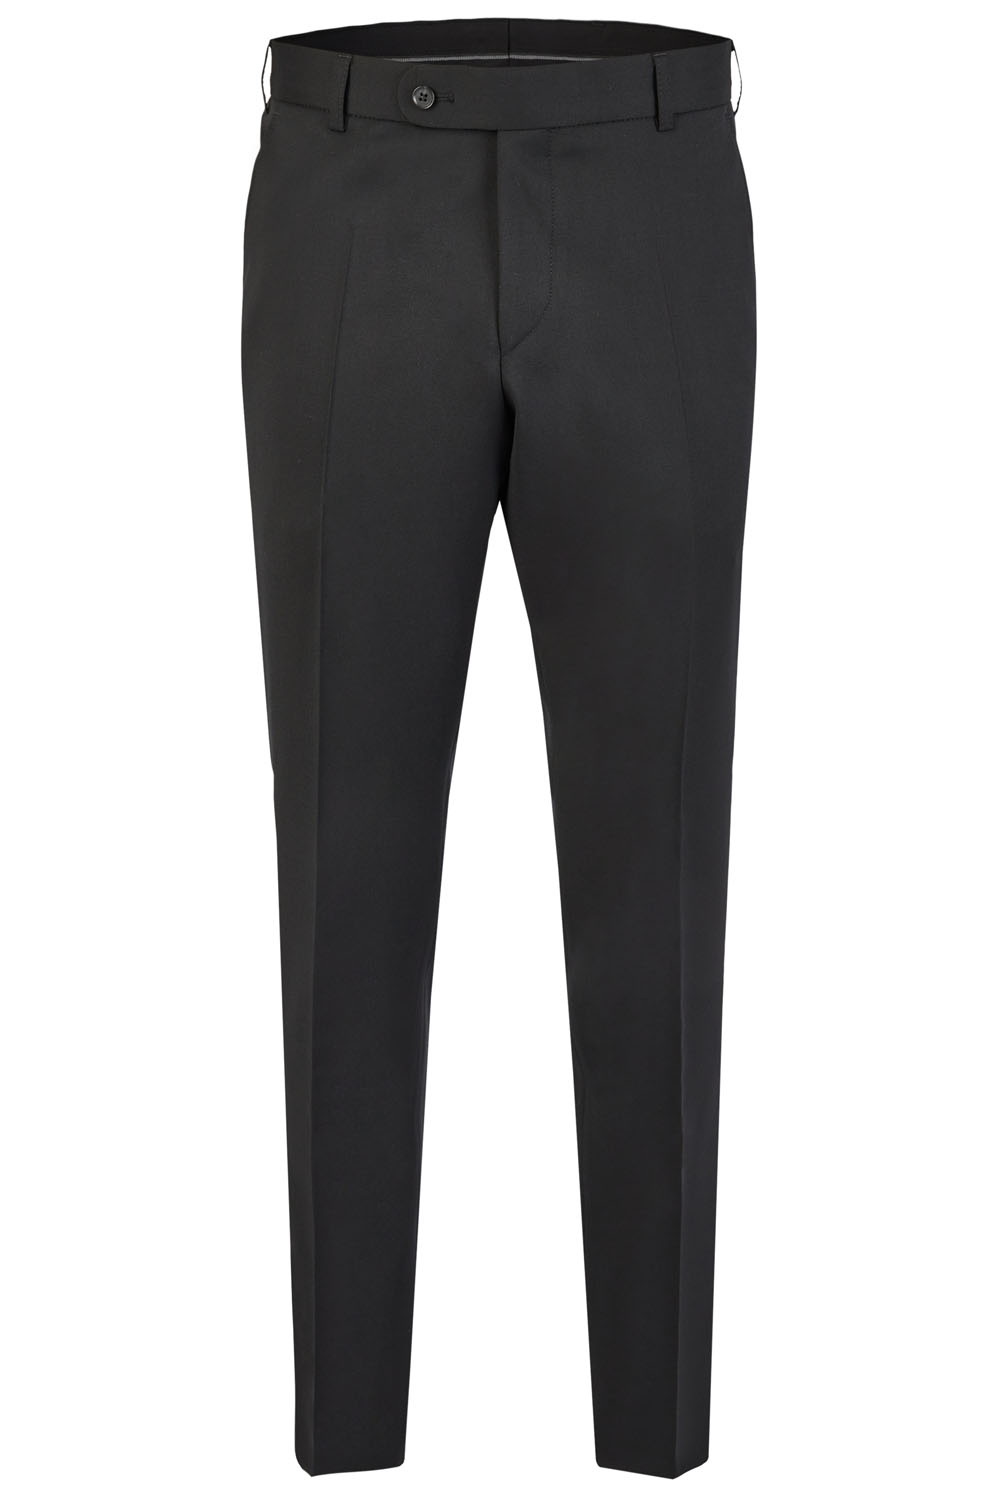 Black 3 Piece Suit - Tom Murphy's Formal and Menswear